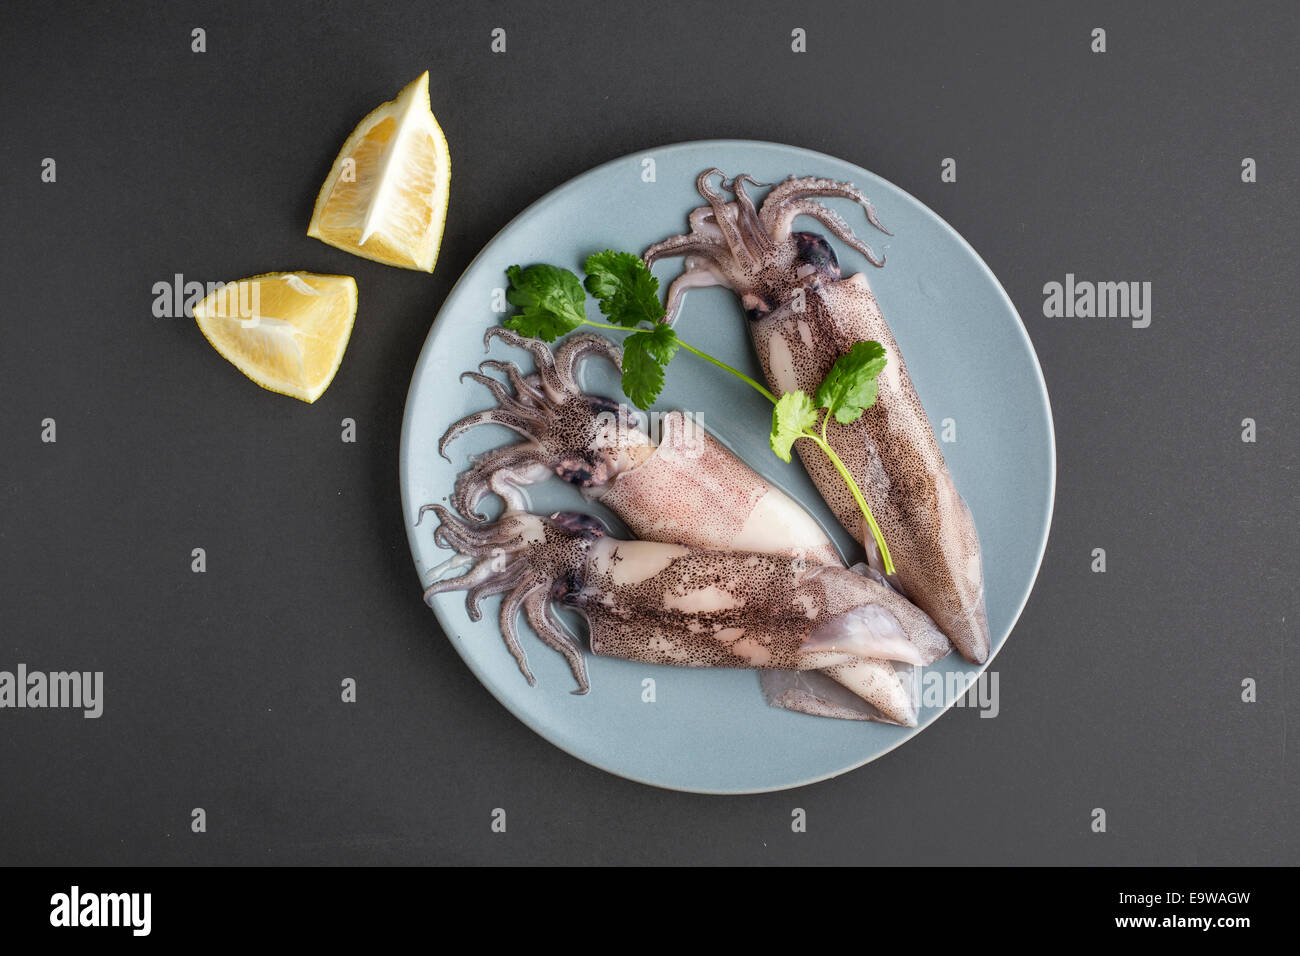 Raw squids on a plate editorial food Stock Photo